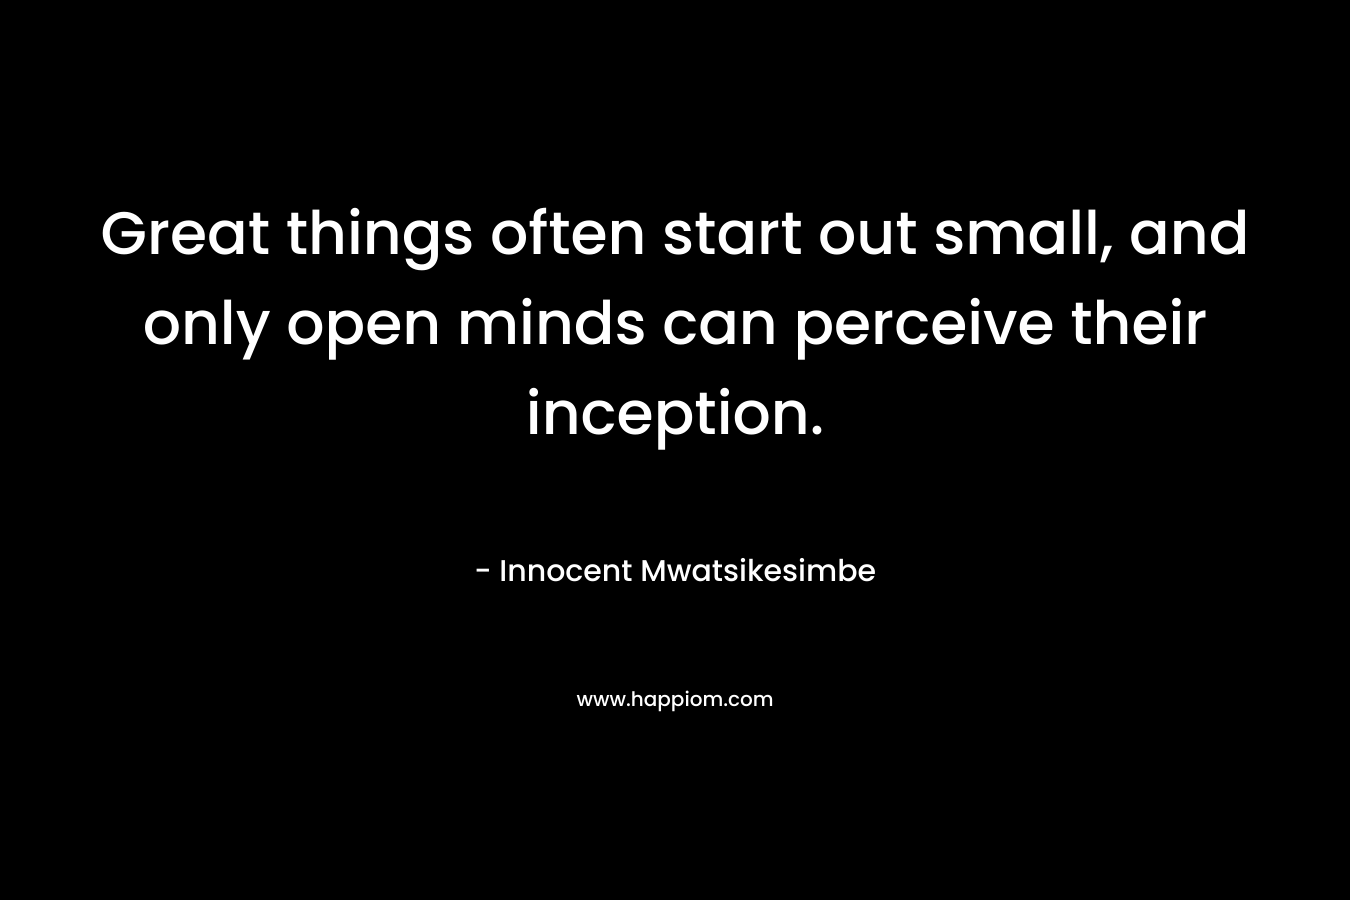 Great things often start out small, and only open minds can perceive their inception. – Innocent Mwatsikesimbe